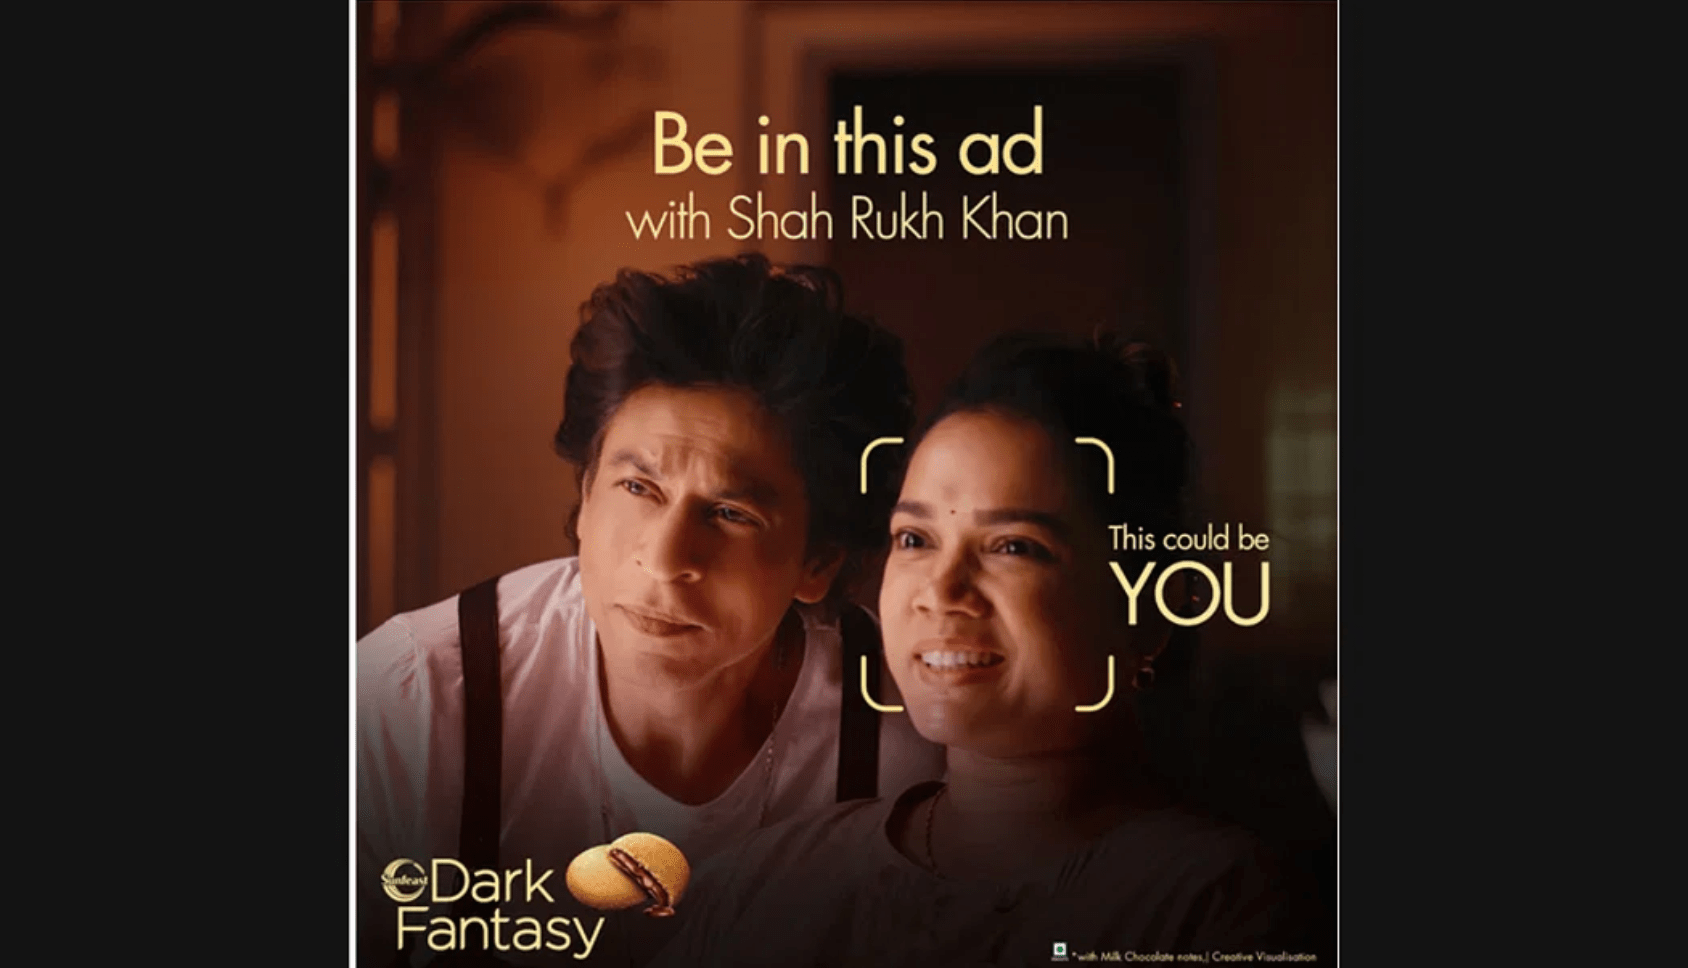 Thanks to Dark Fantasy's Magic, You Can Co-Star With Shahrukh Khan In The Latest Advert-Markedium